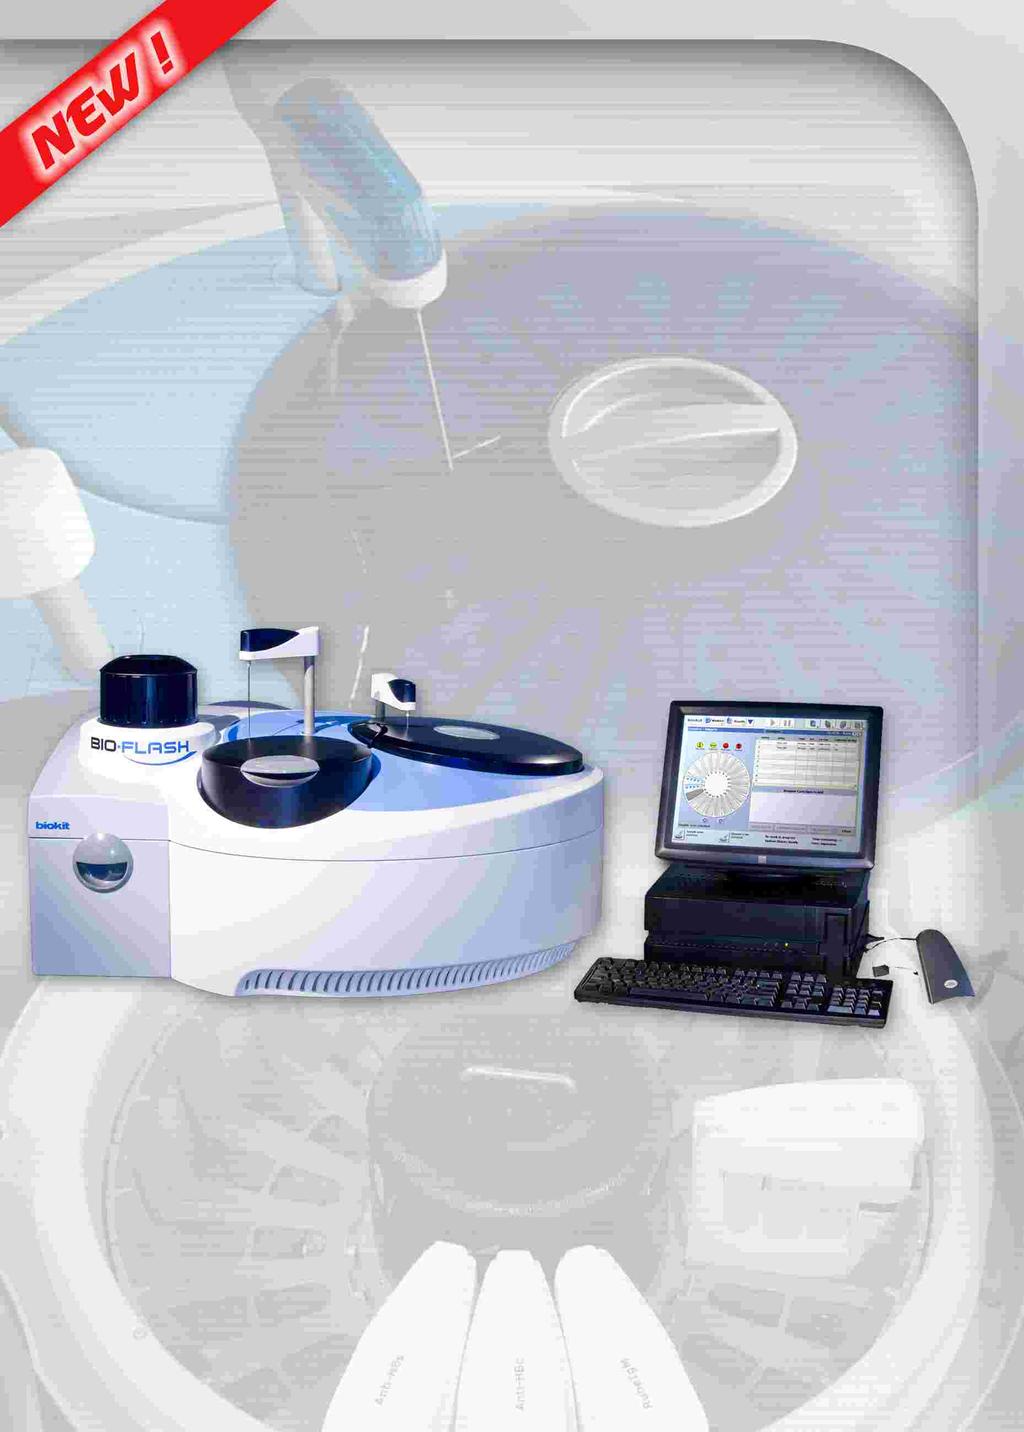 SOFTWARE Chemiluminescence Analyzer Intuitive operator interface Easy-to-follow pictograms for